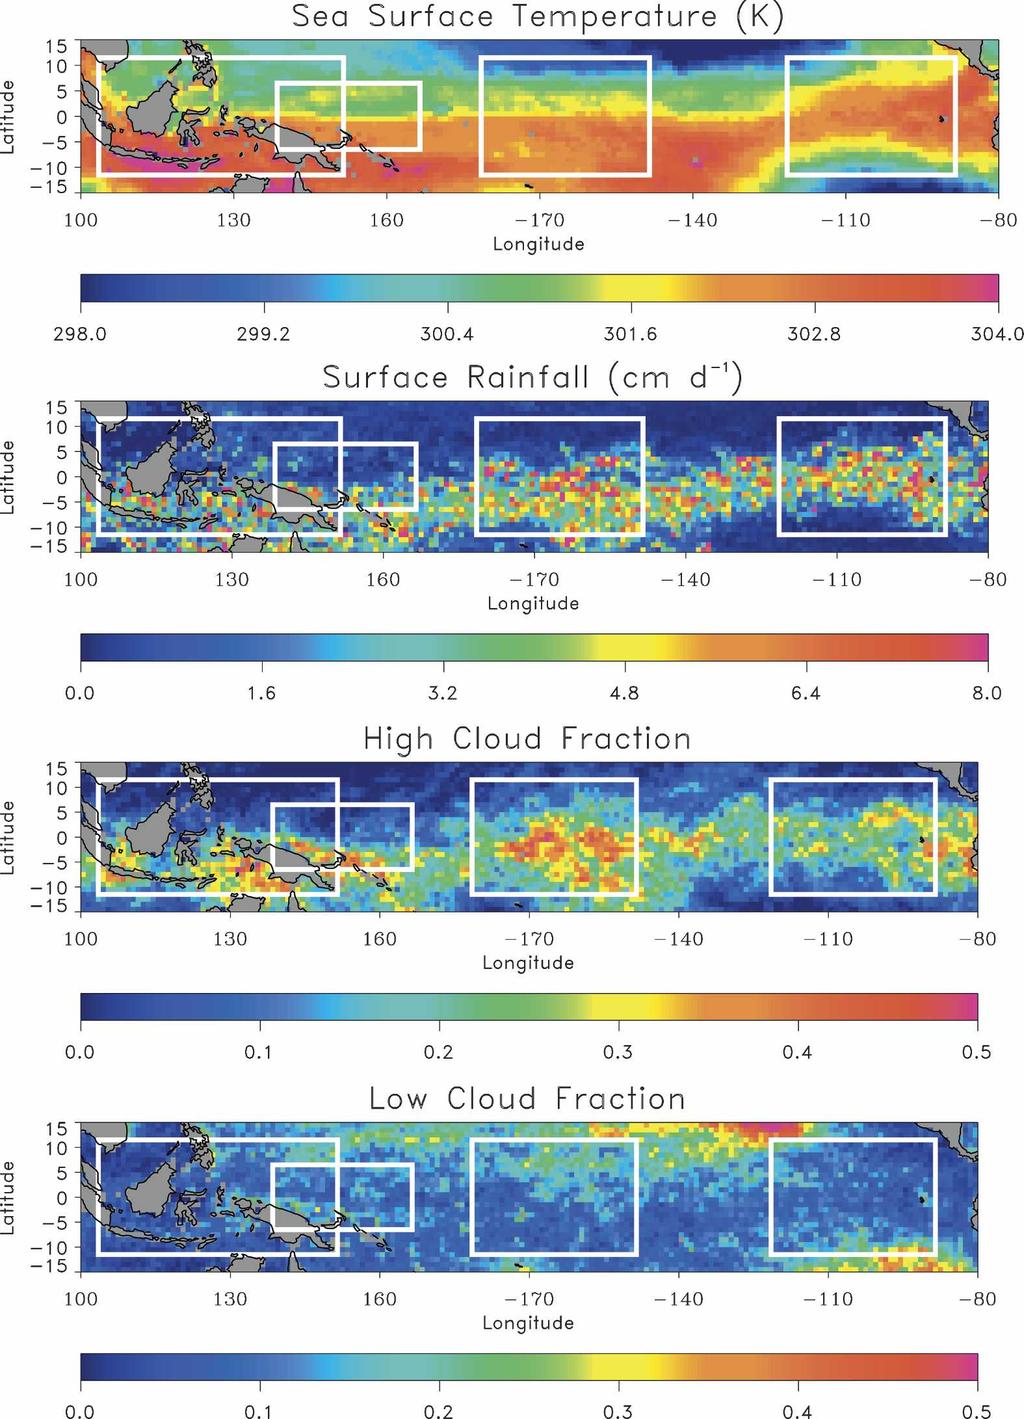 1392 J O U R N A L O F C L I M A T E VOLUME 19 FIG. 1. Mean atmospheric and surface properties in the tropical Pacific for the month of February 1998.